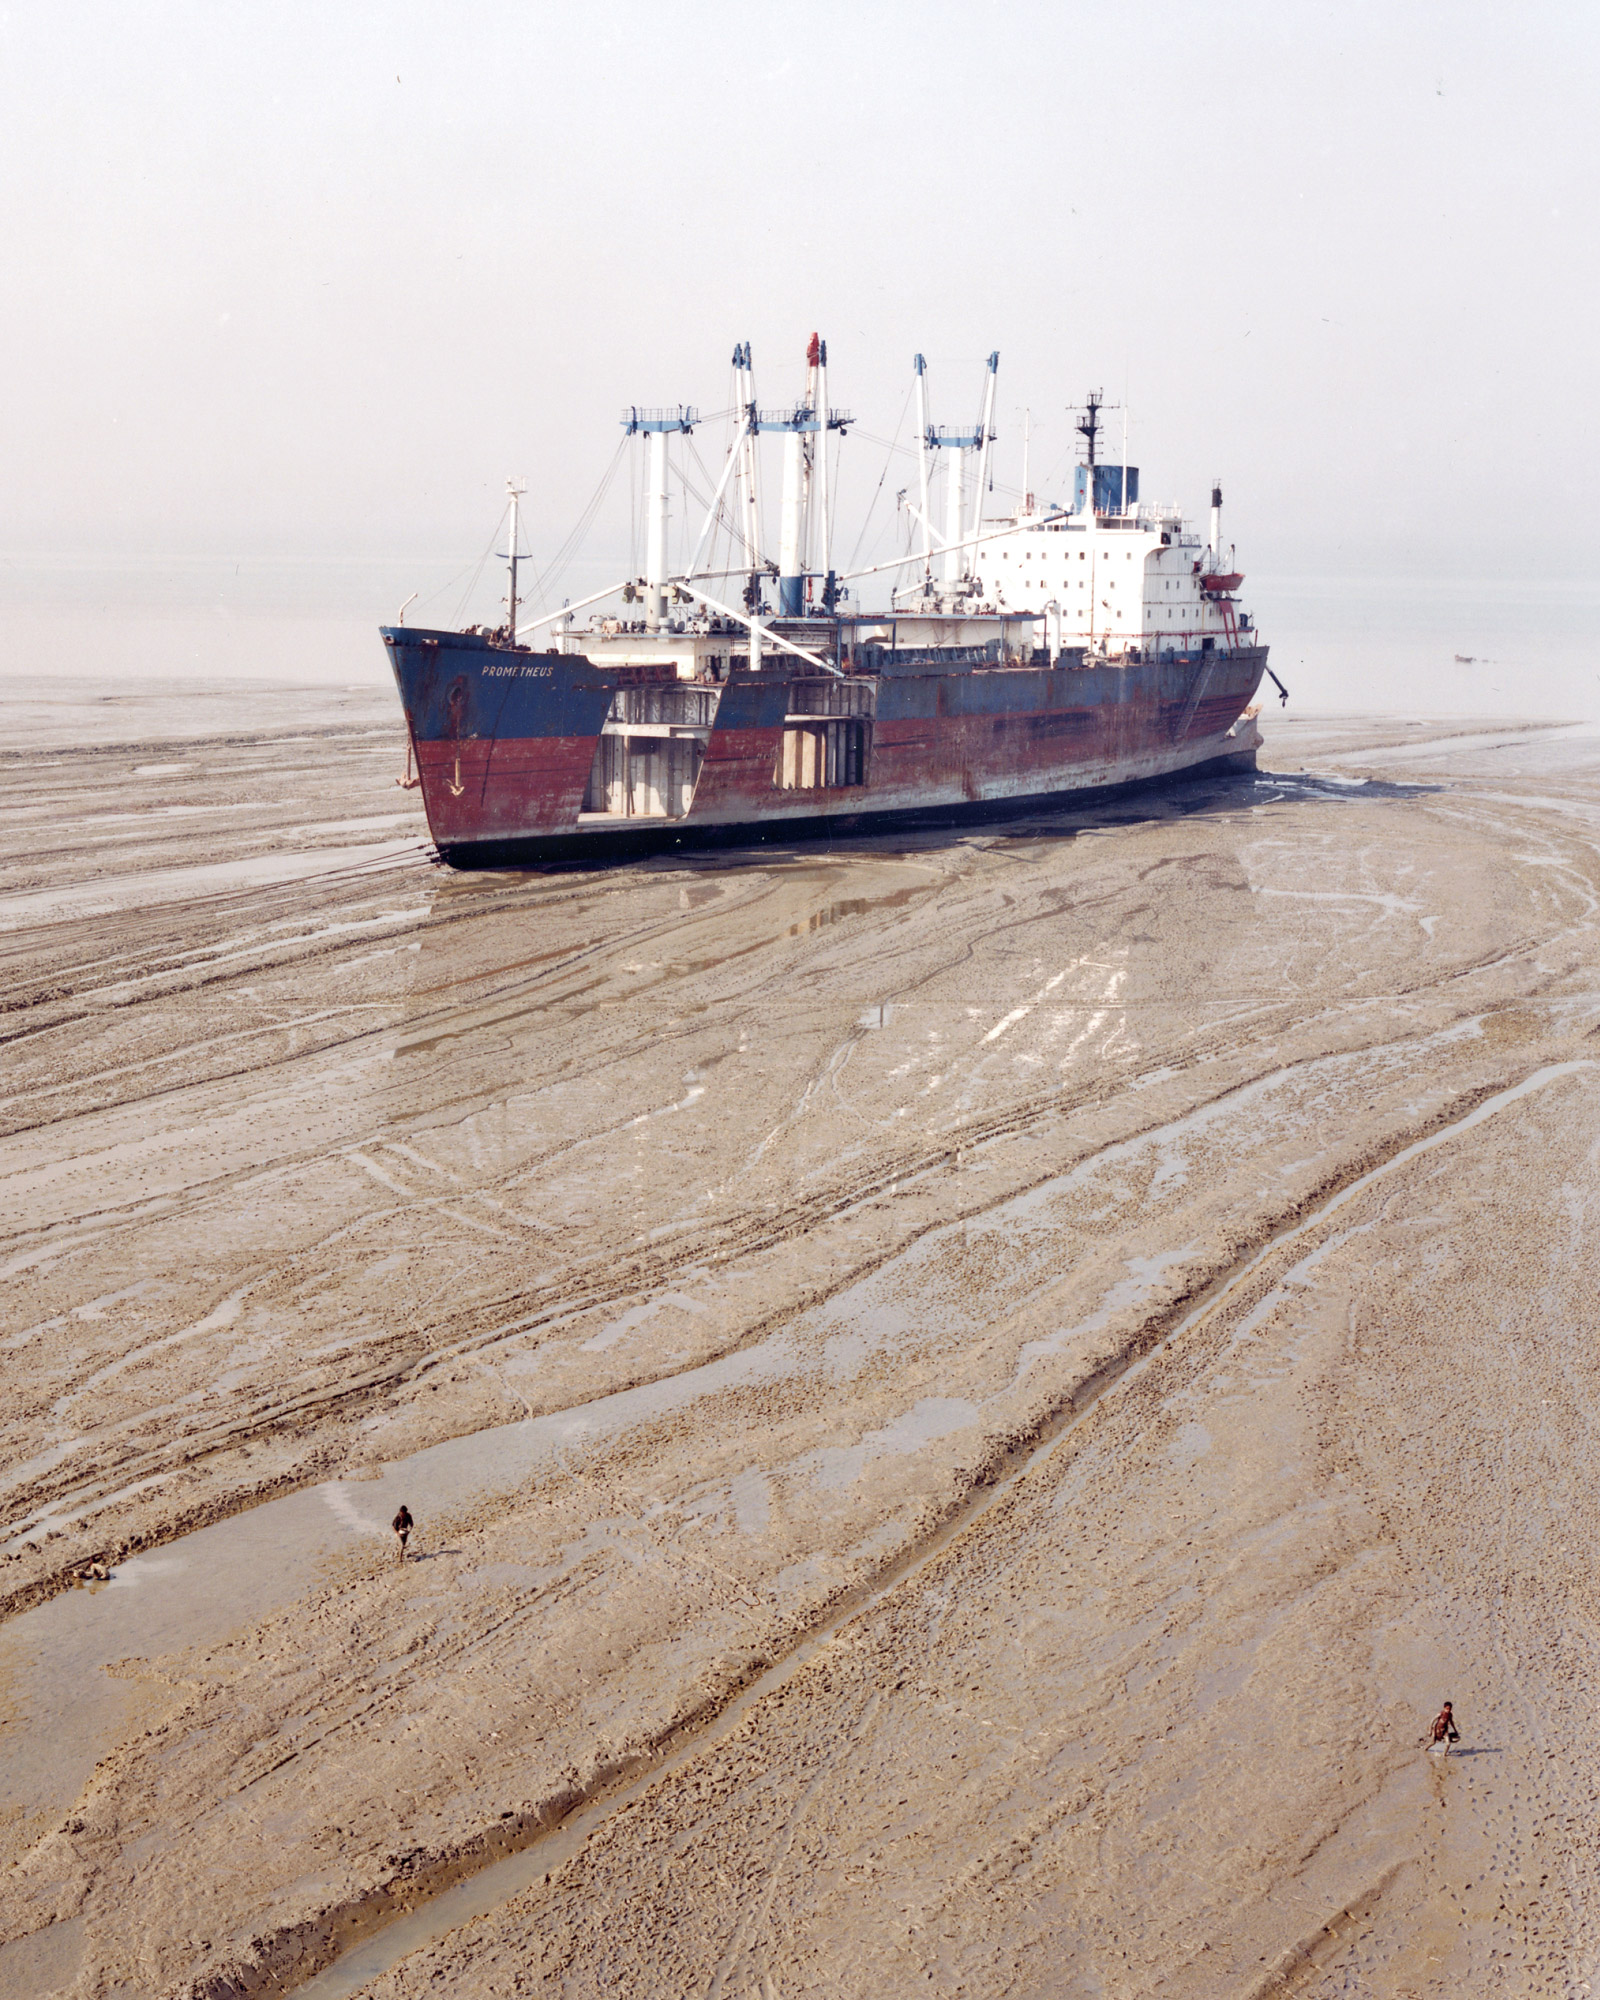 A two thousand one photograph by Edward Burtynsky titled 